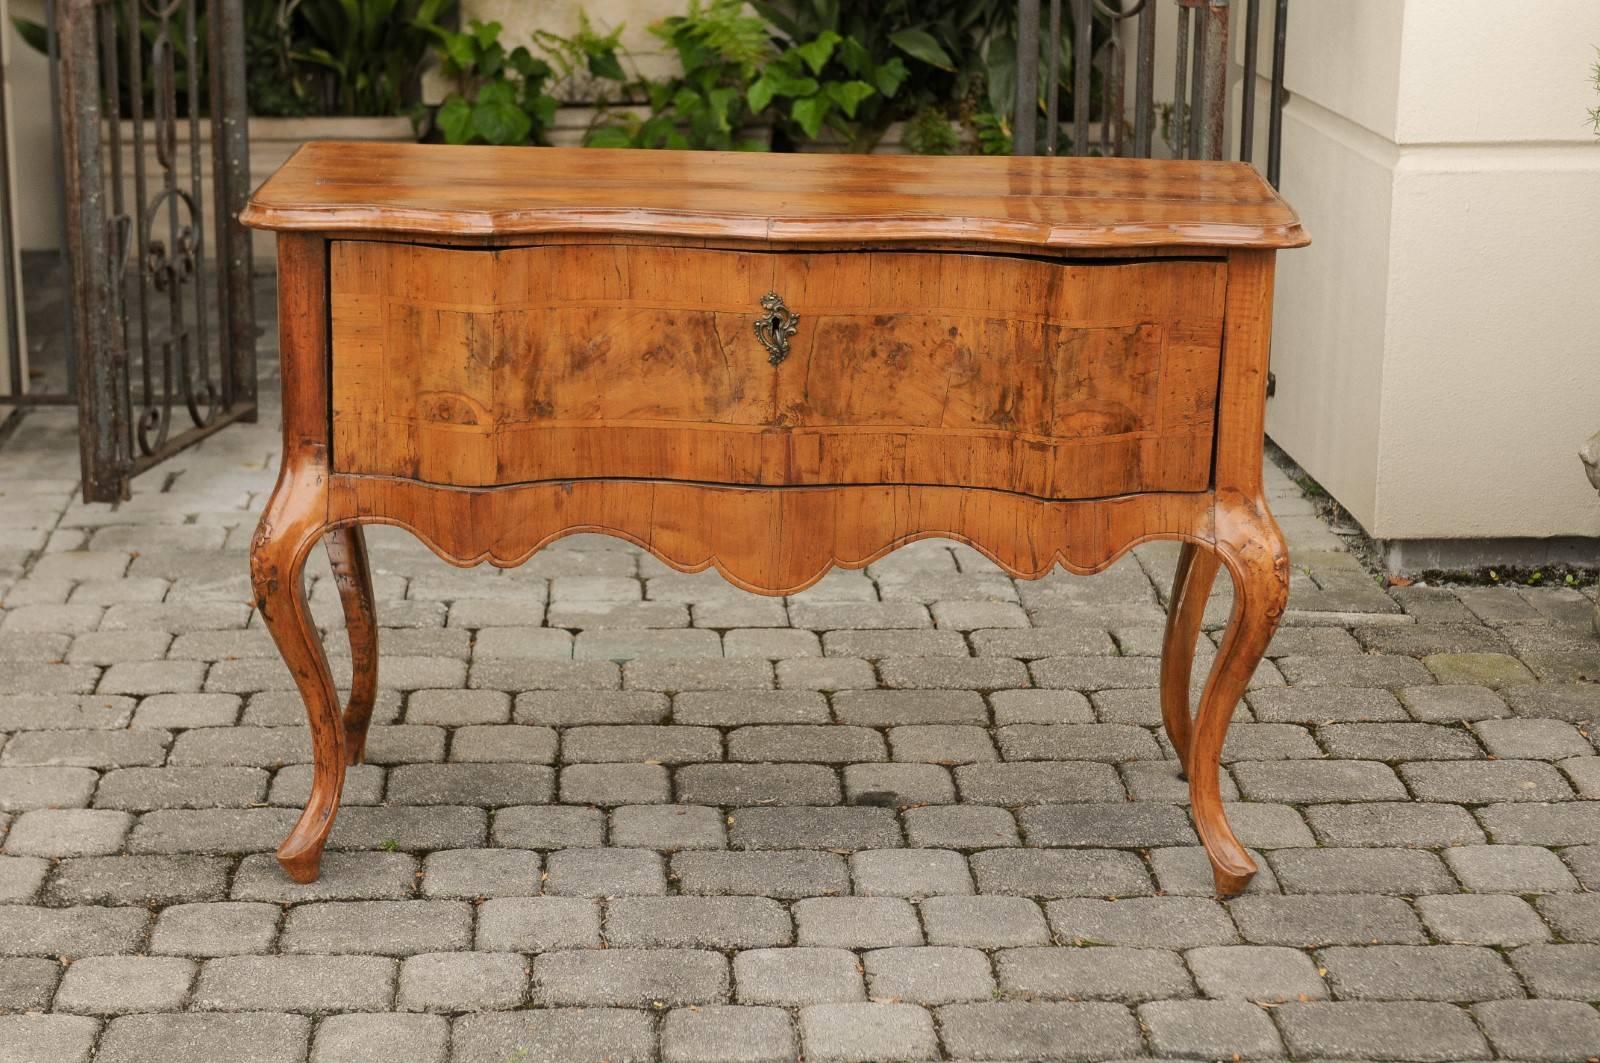 An Italian Rococo walnut single drawer commode from the early 19th century, with serpentine front and cabriole legs. Born during the second decade of the buoyant 19th century, this Italian walnut commode features a rectangular planked top with